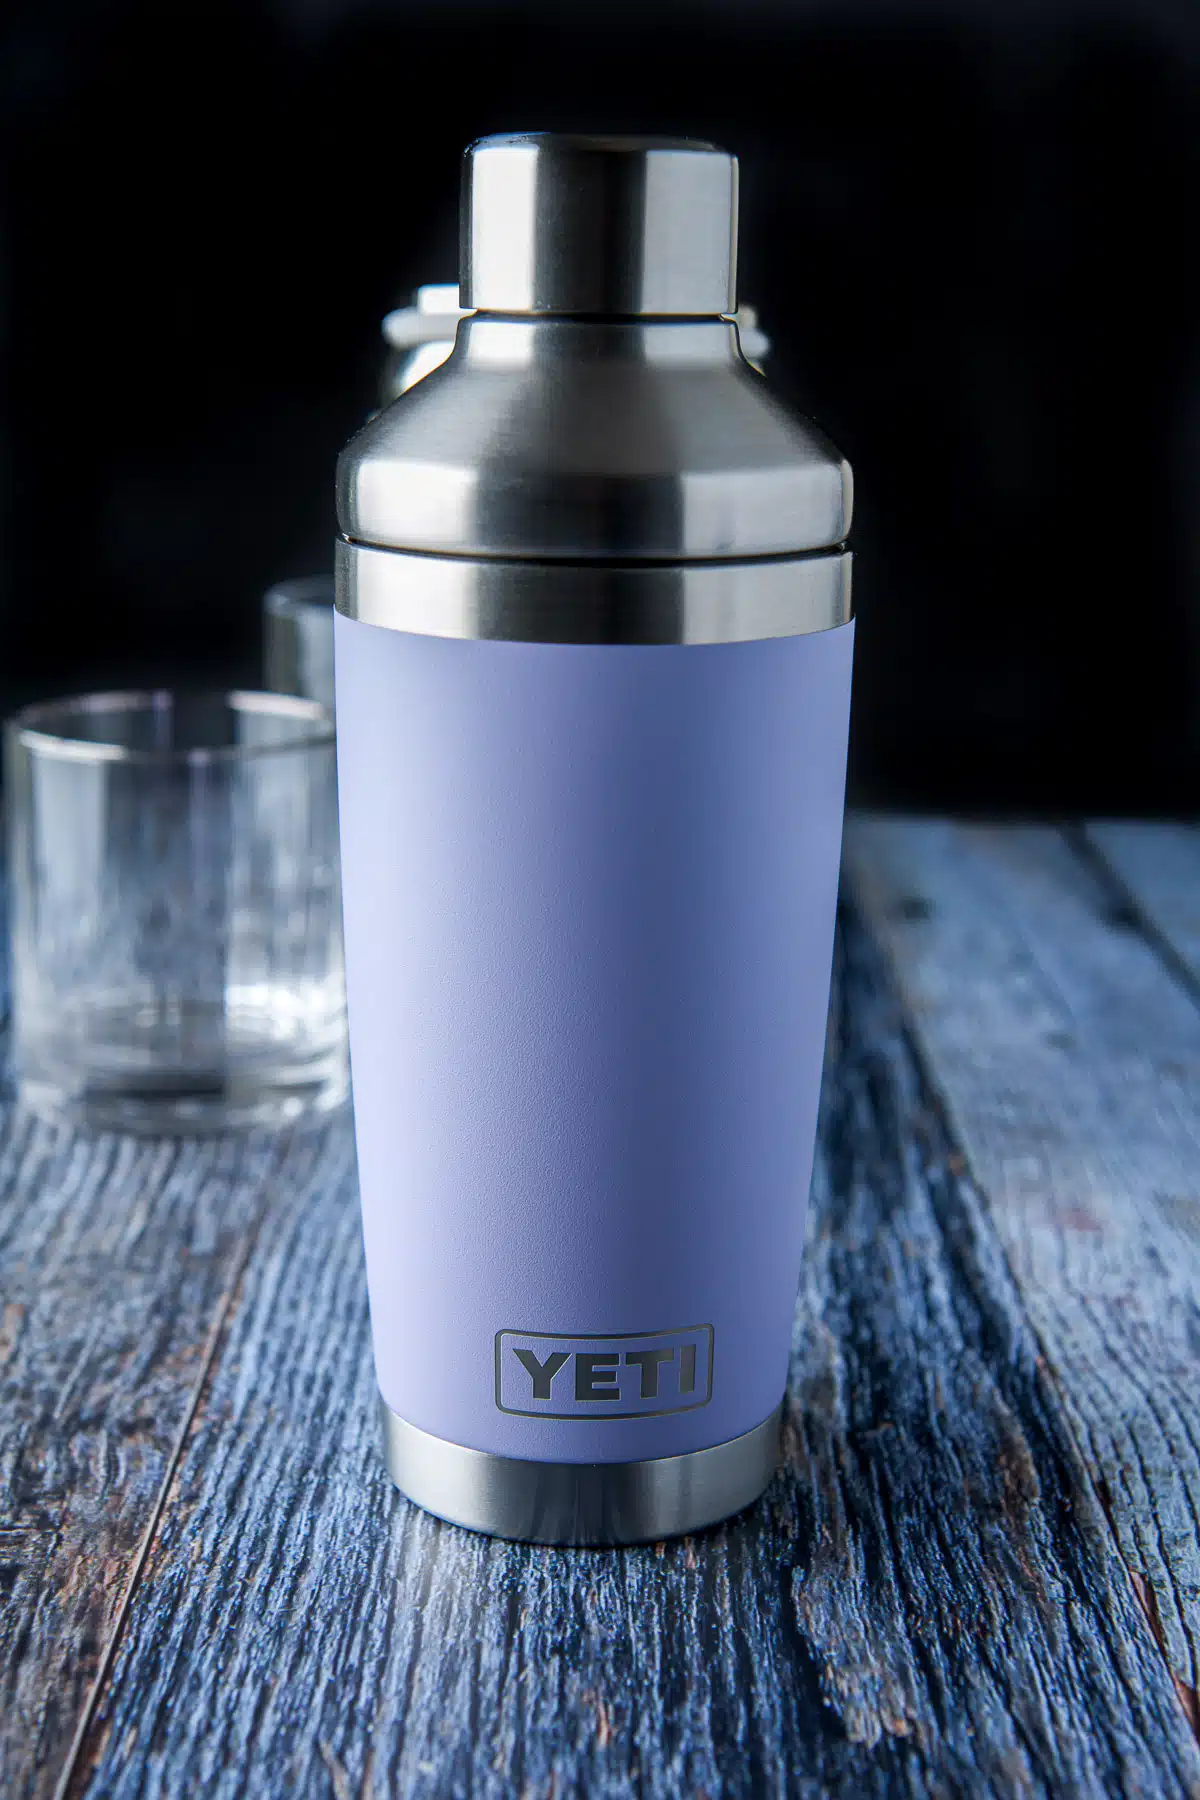 A Yeti brand cocktail shaker on a table with glasses